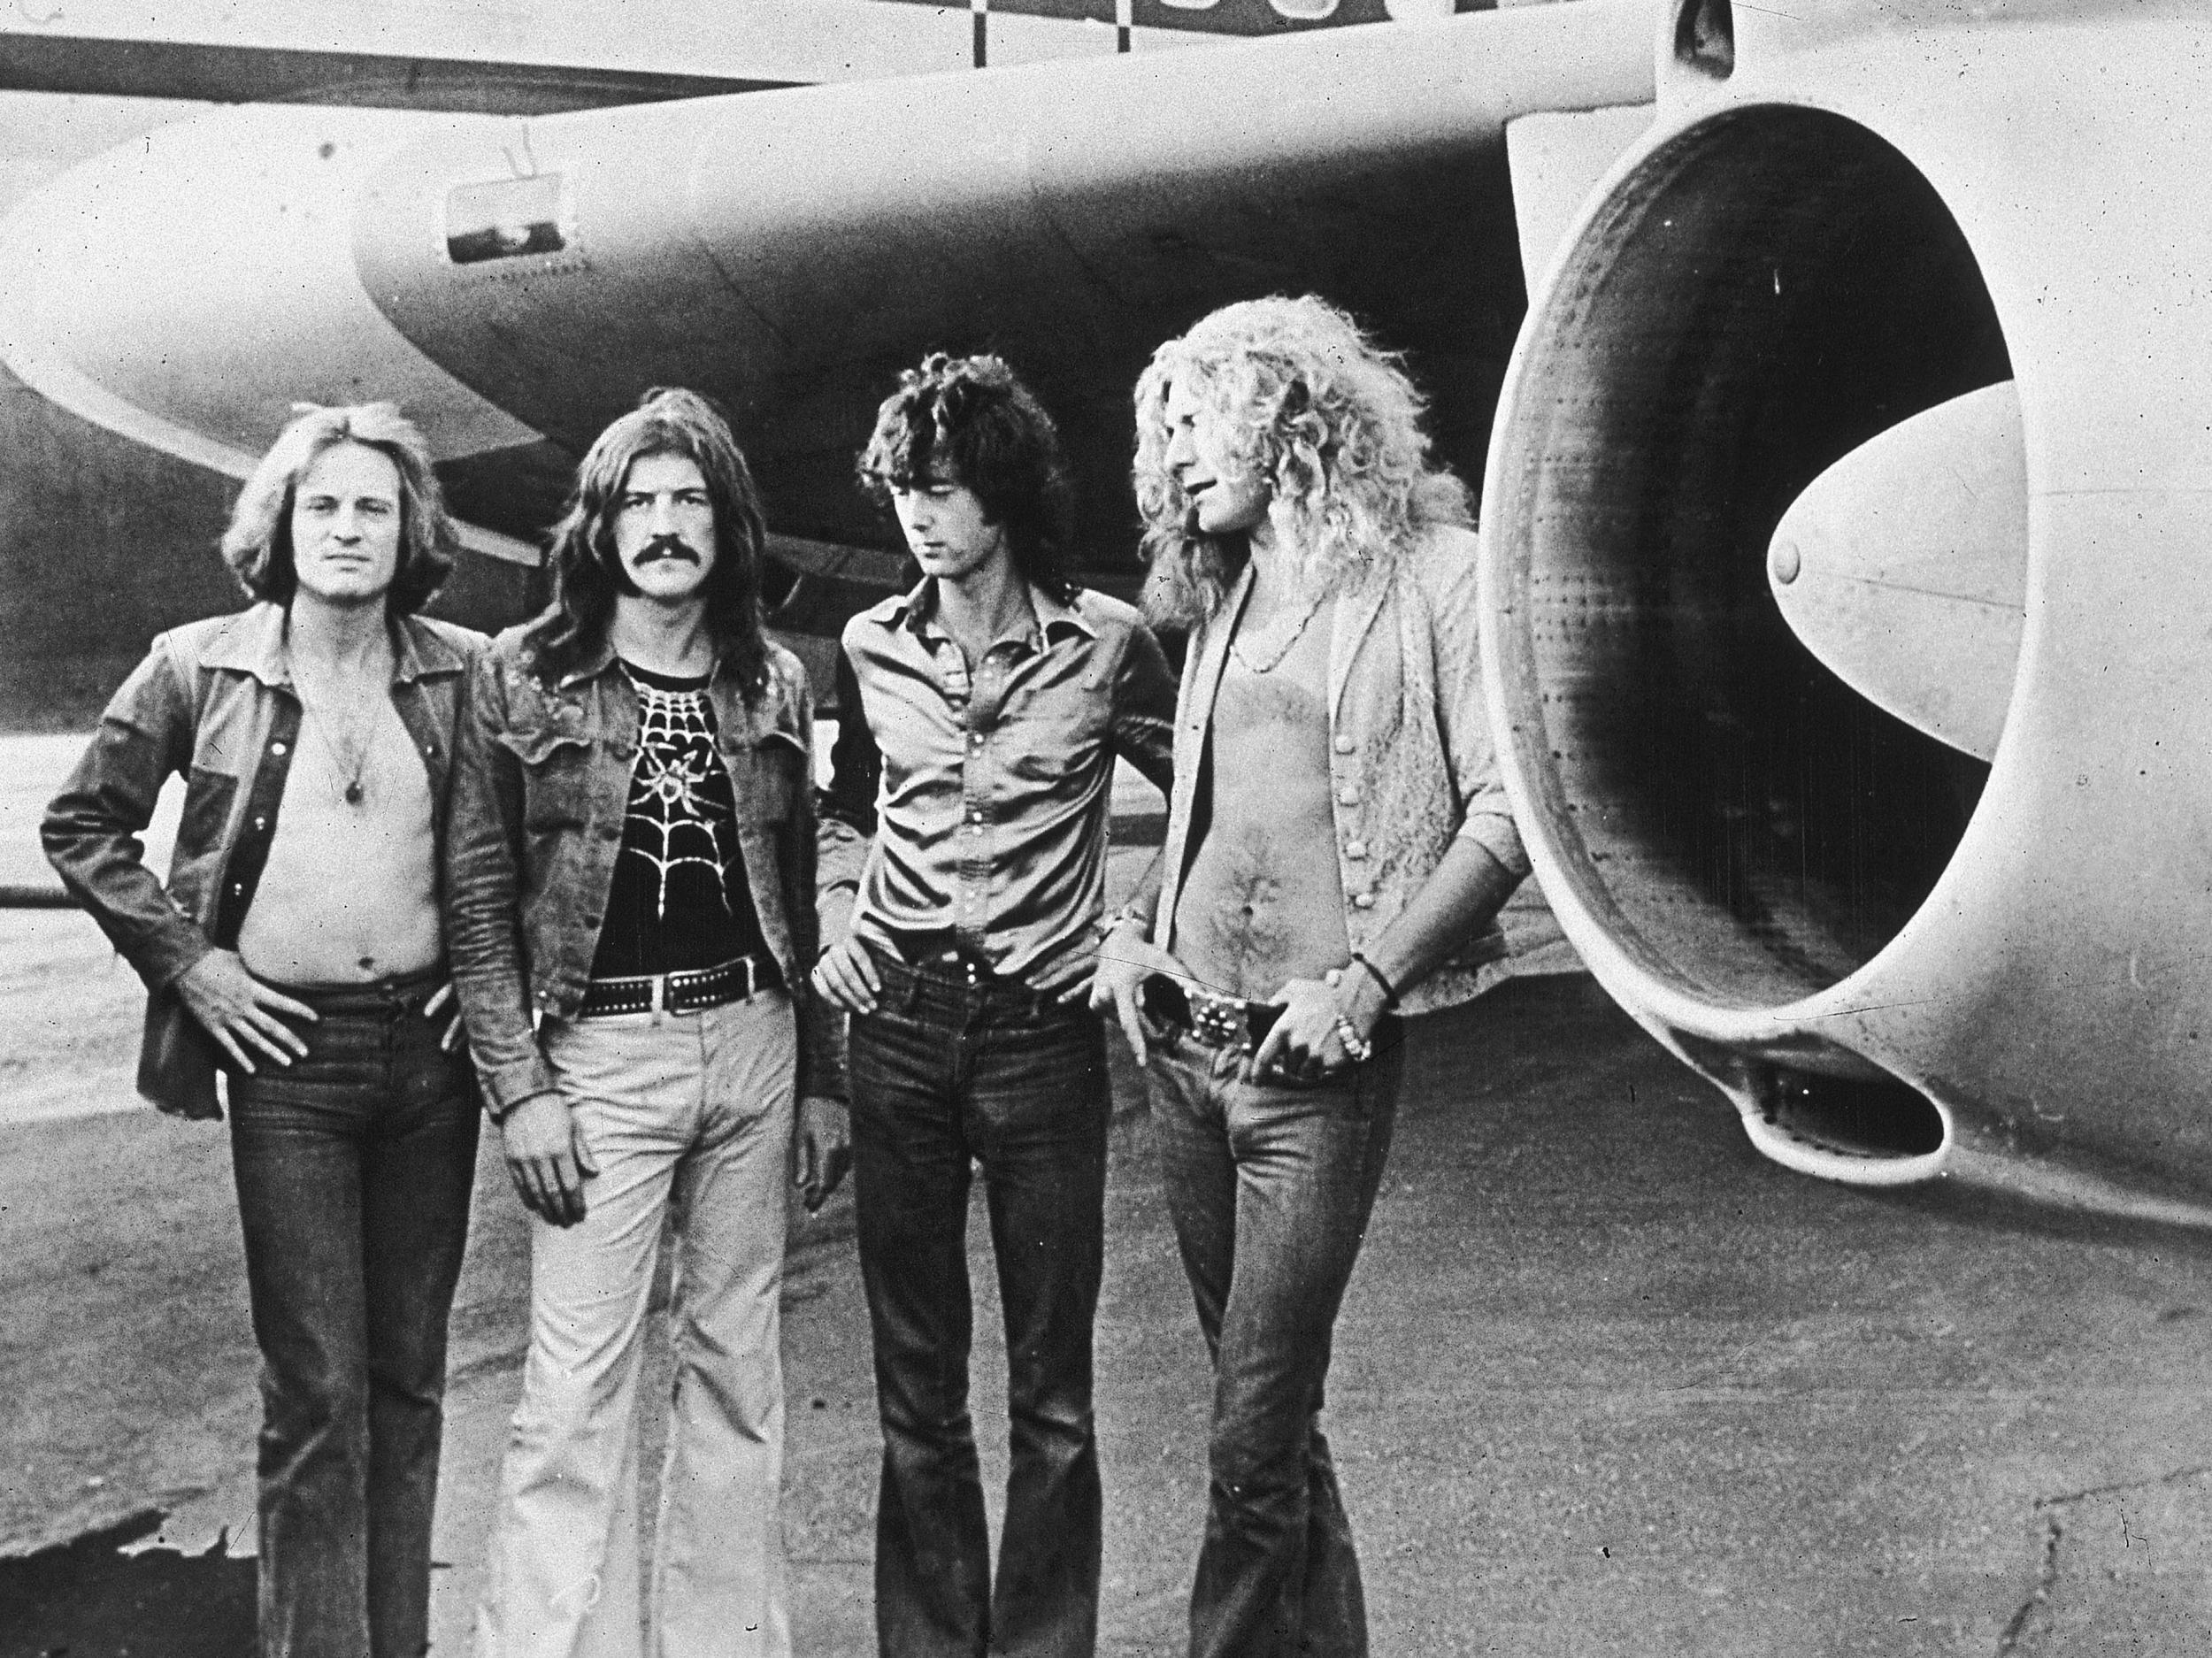 John Paul Jones, John Bonham, Jimmy Page and Robert Plant in front of their private airliner, The Starship, in 1973